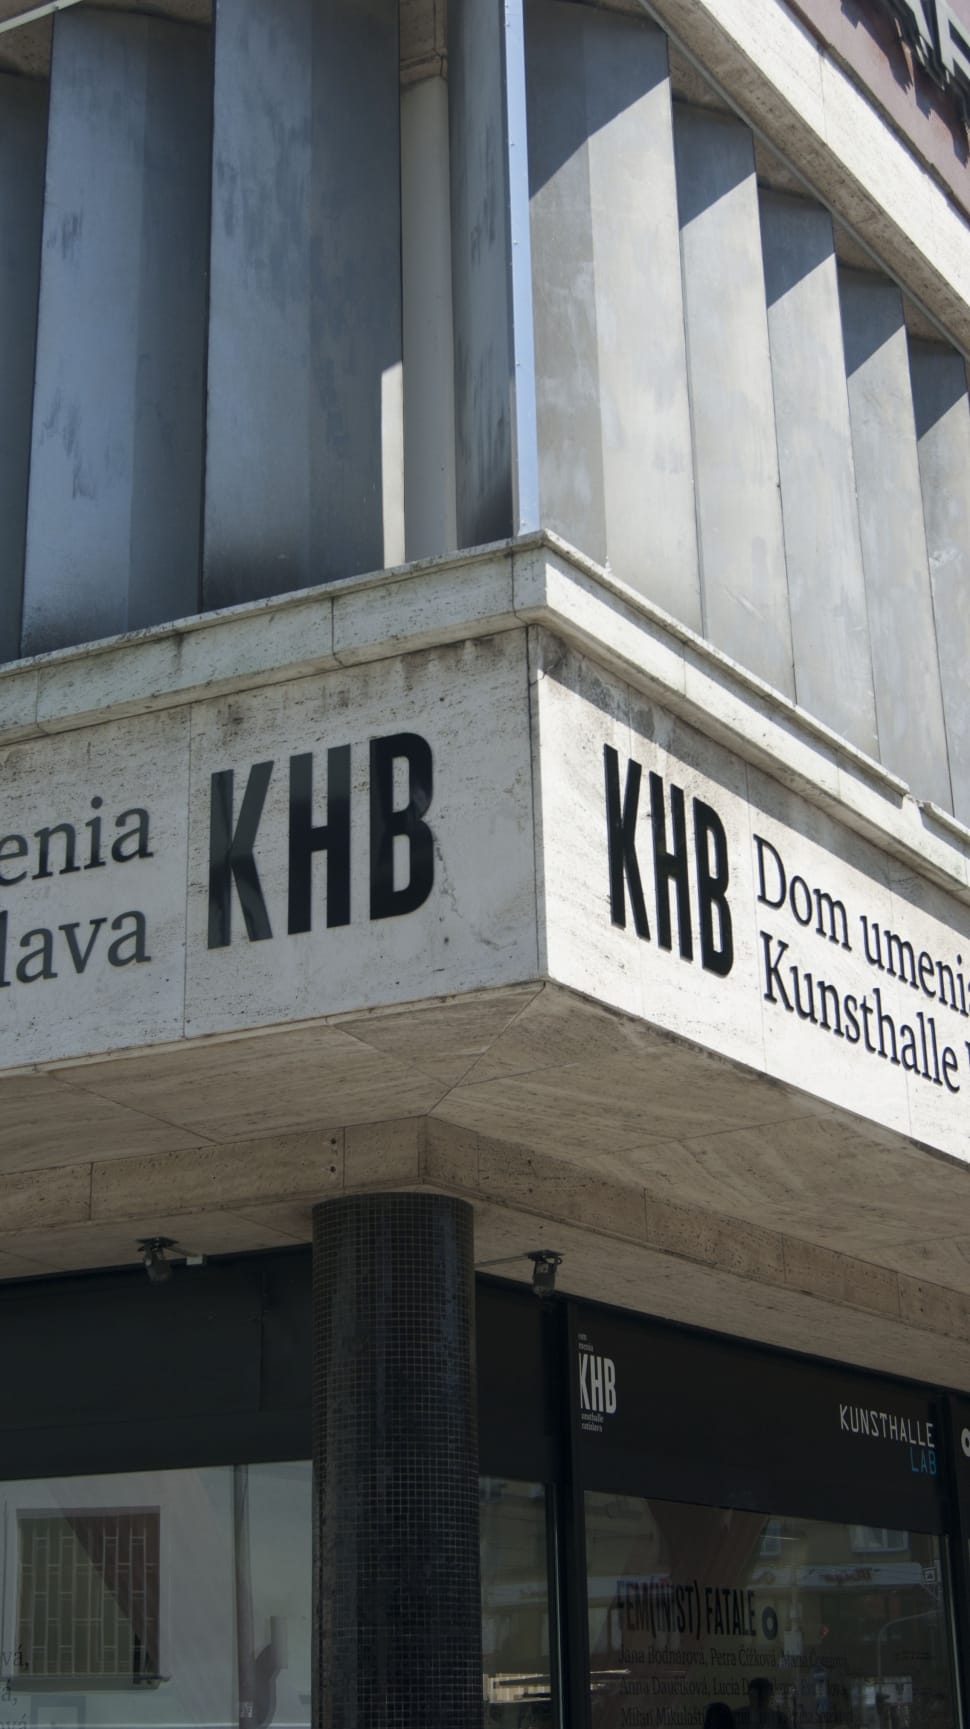 khb dom kunsthalle wall sign preview